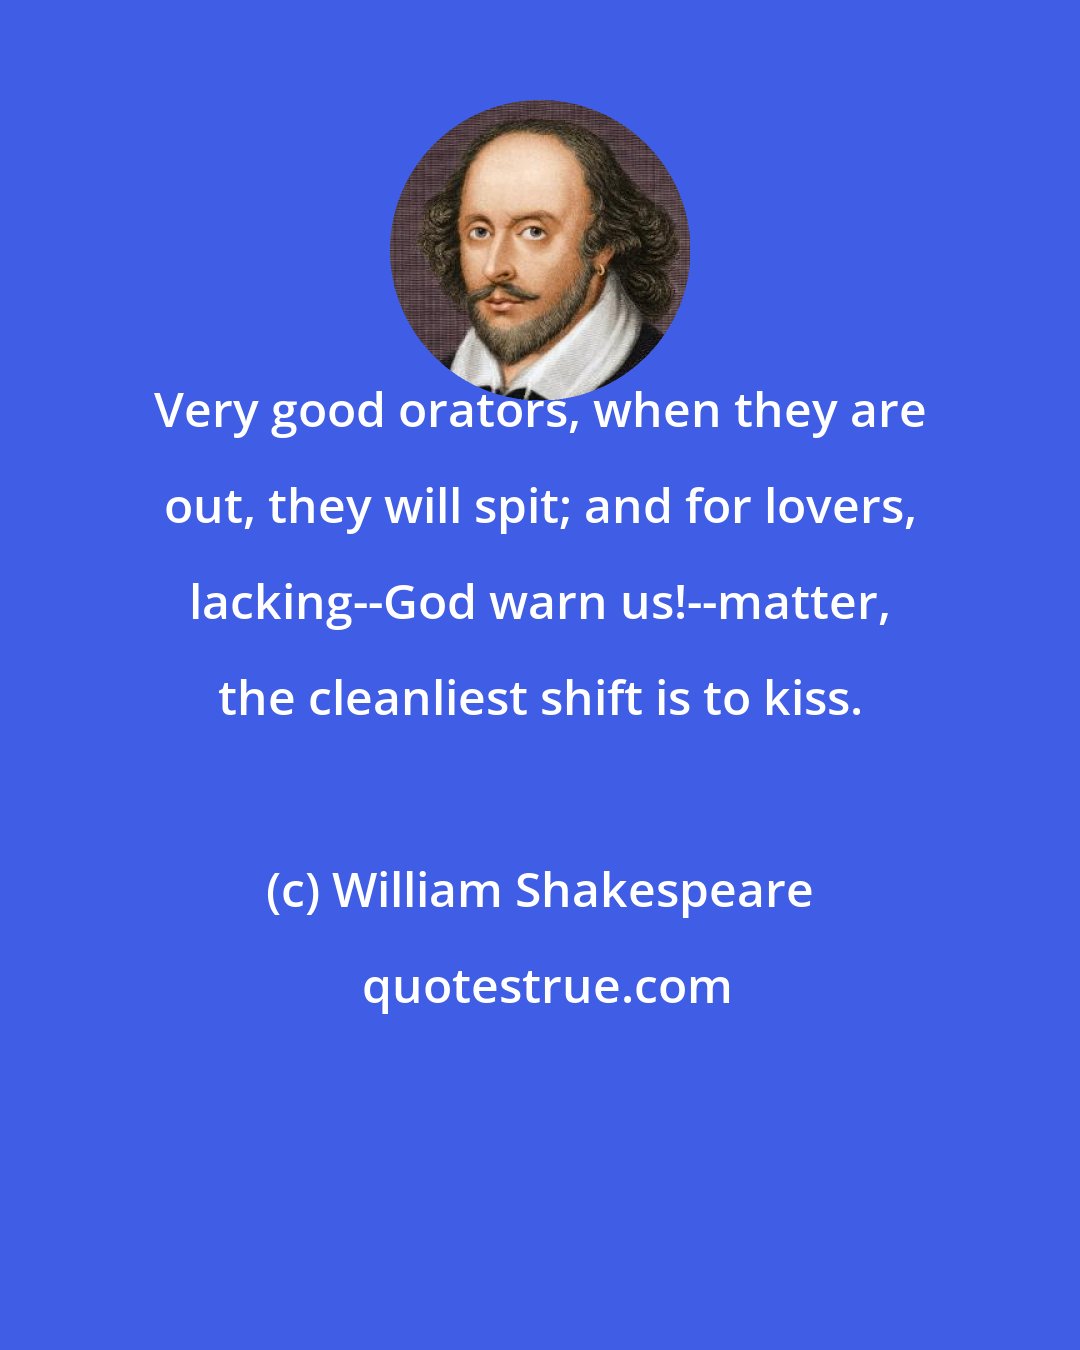 William Shakespeare: Very good orators, when they are out, they will spit; and for lovers, lacking--God warn us!--matter, the cleanliest shift is to kiss.